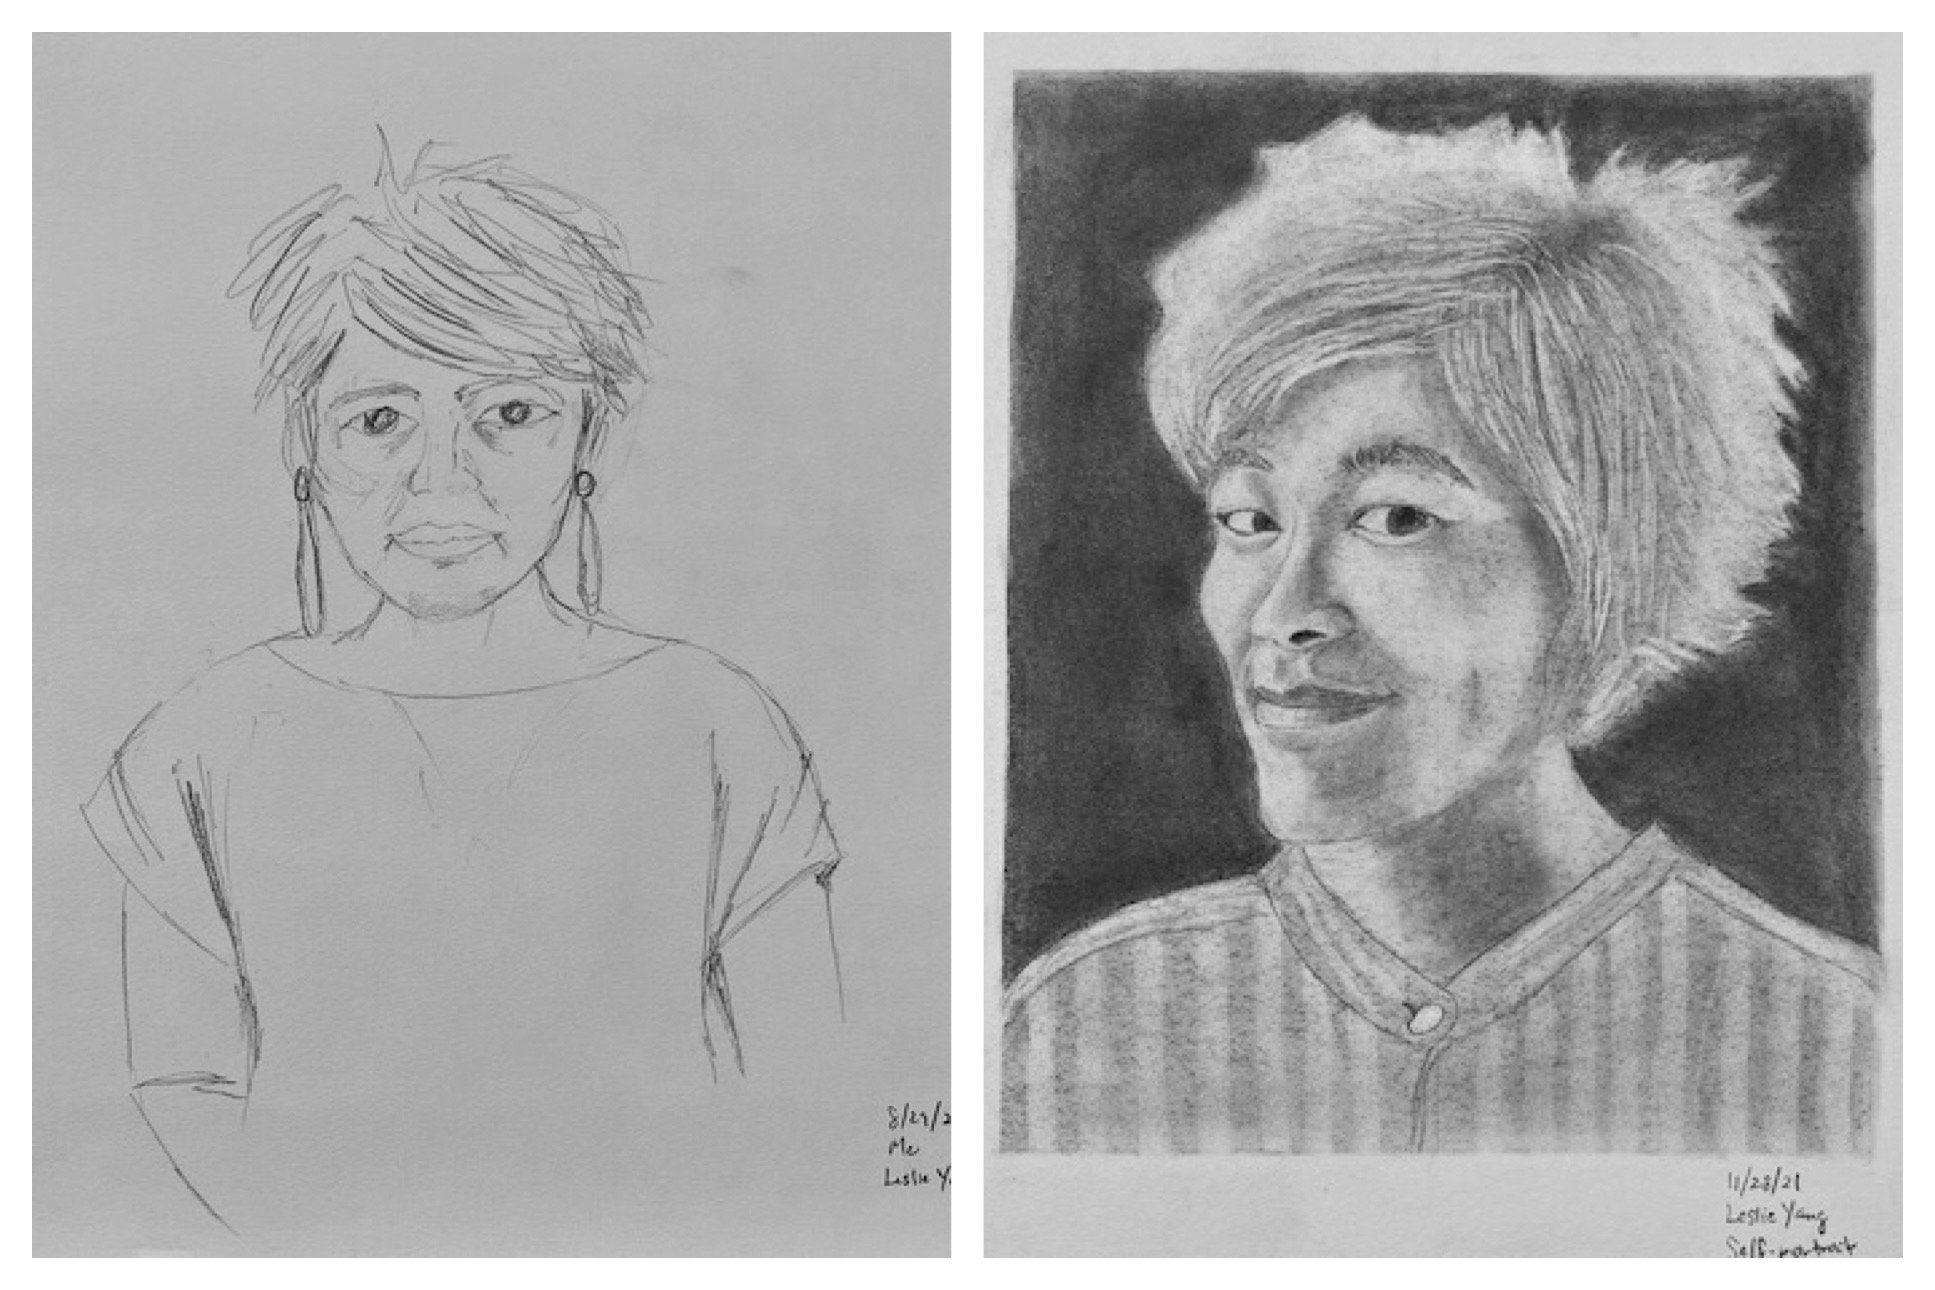 Camille's Before and After Self-Portrait Drawings November 22-27, 2021